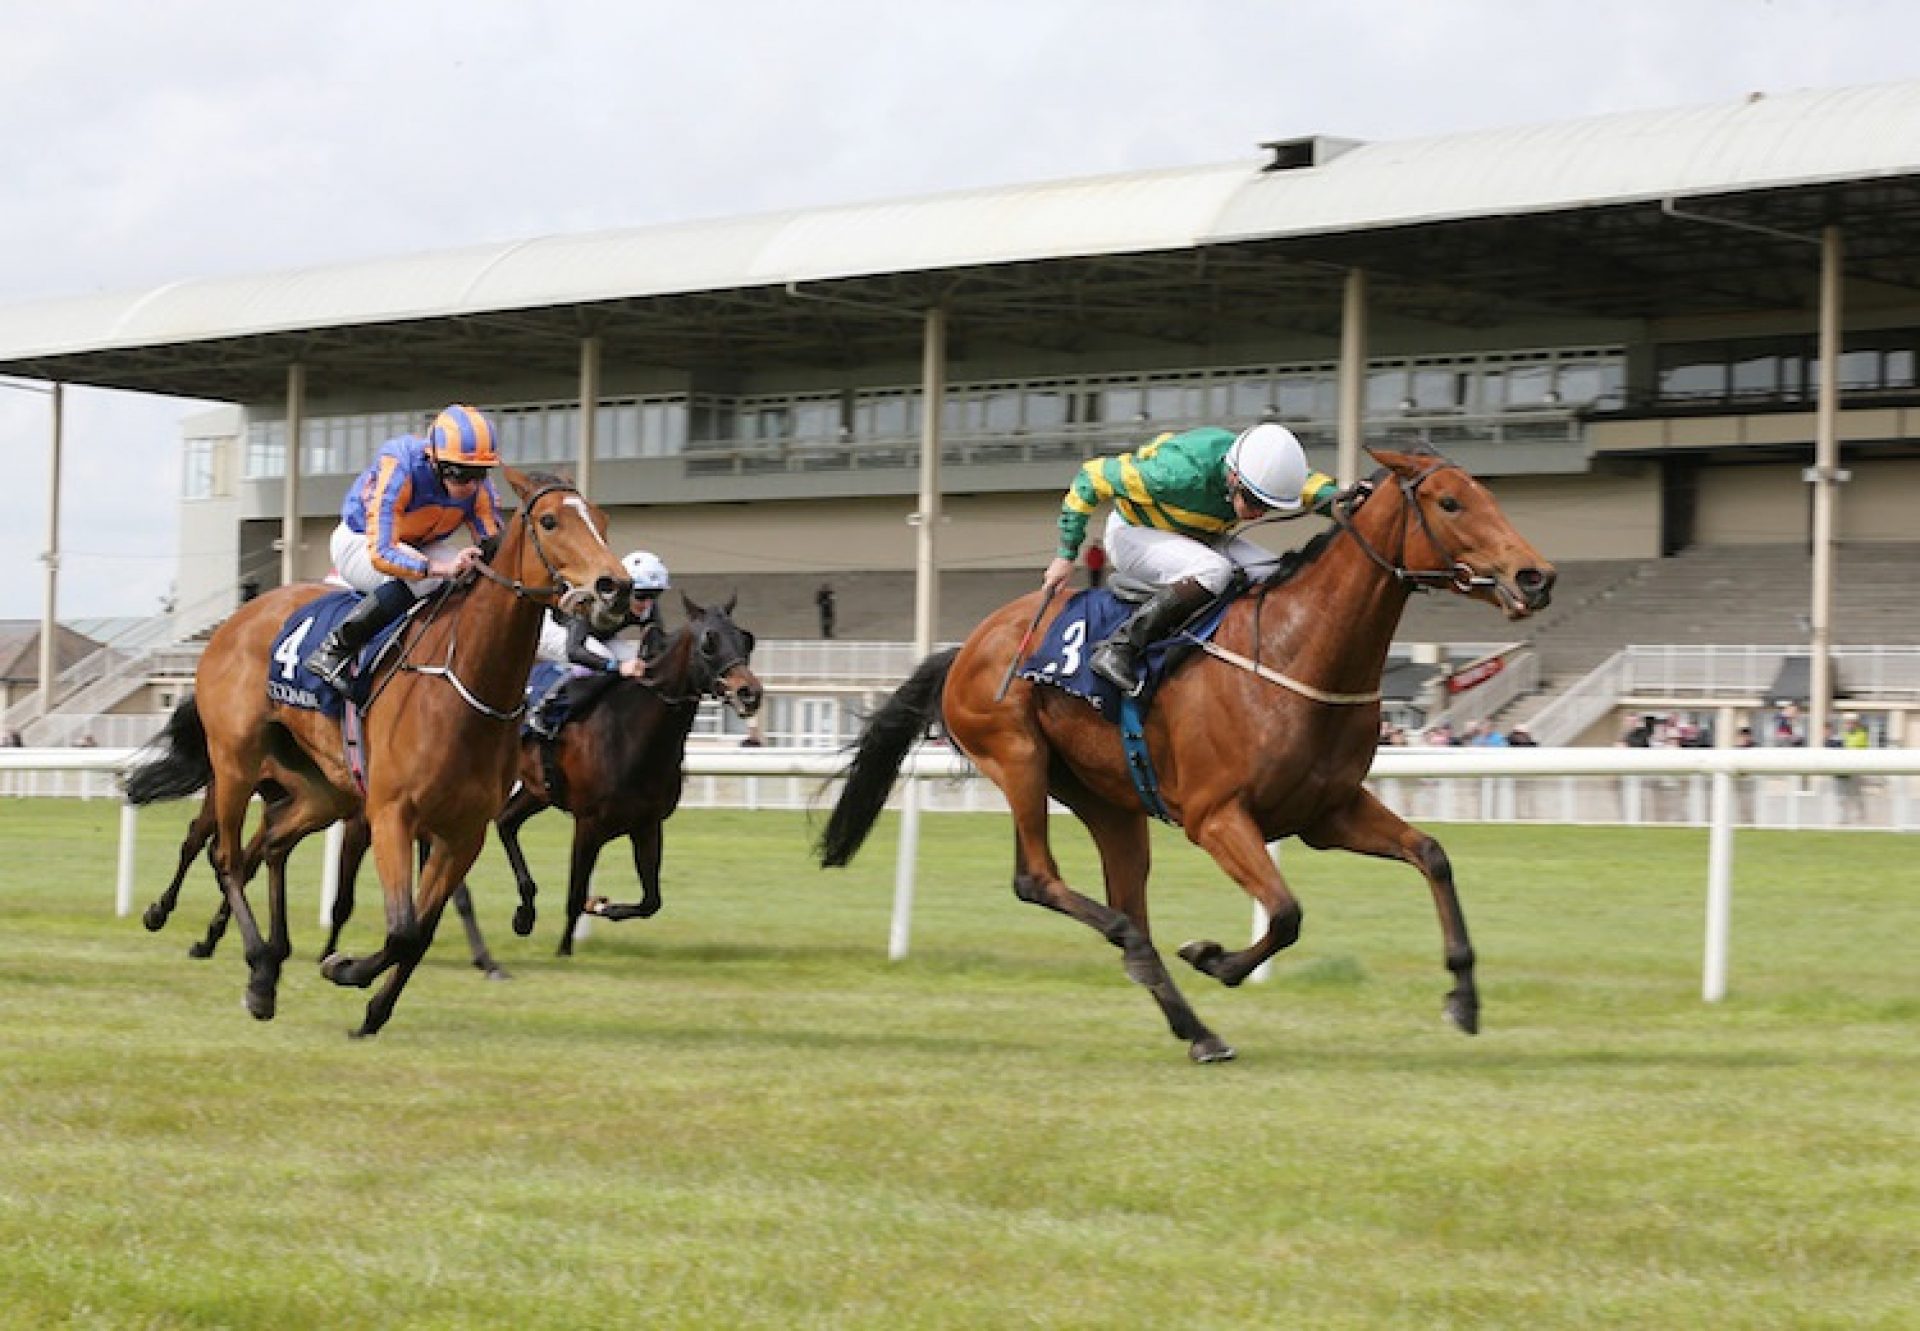 Iveagh Gardens (Mastercraftsman) winning the G3 Athasi Stakes at the Curragh